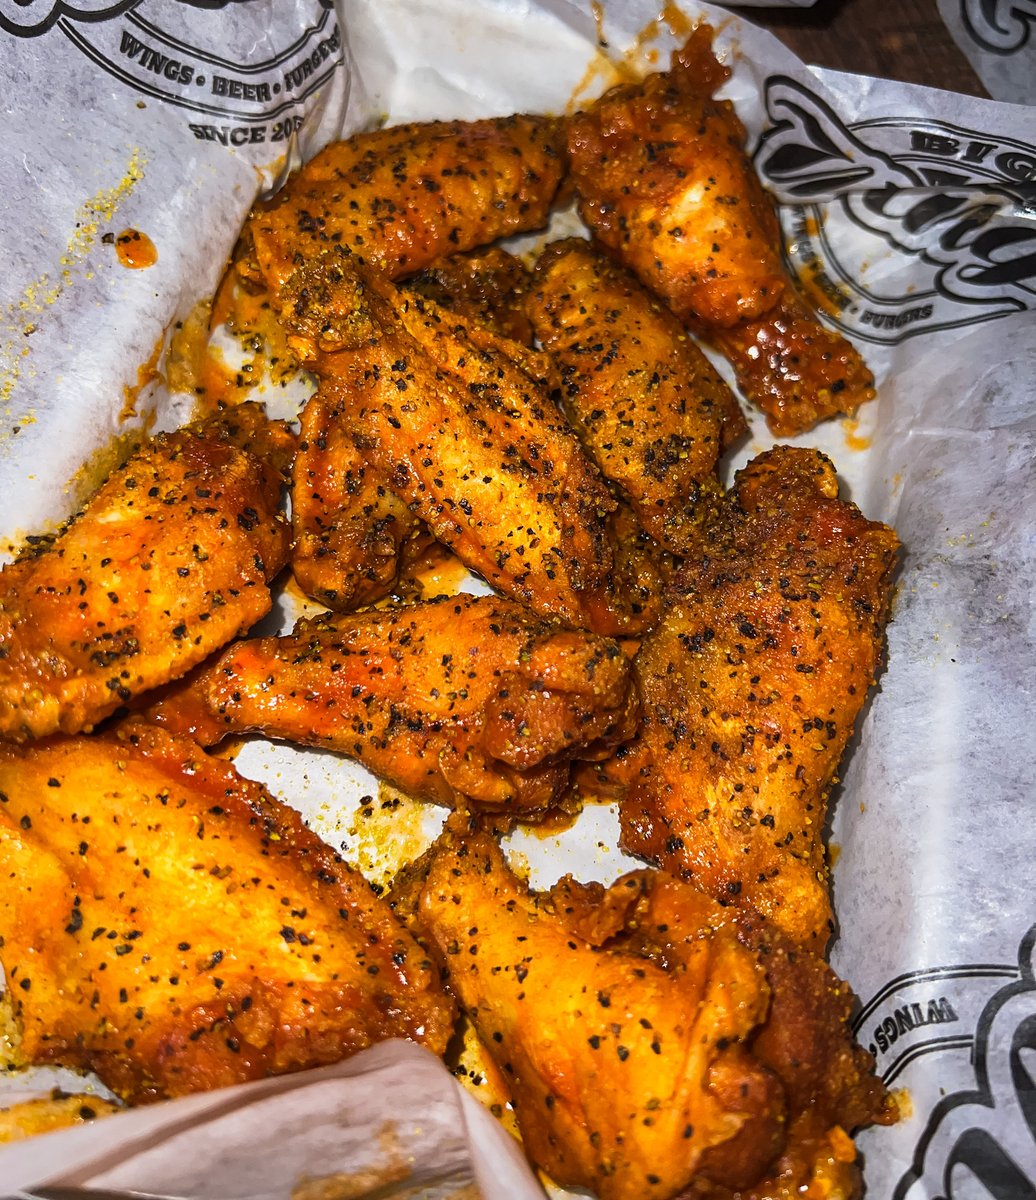 Rise n grind, it’s BOGO Tuesday!🙌#BigCityWings #HoustonsWingJoint  #DailySpecials #Deals #Houstonwings #Houstonfood #houstonfoodies #Houstonrestaurants #houstonsportsbar #chickenwings #twofortuesday